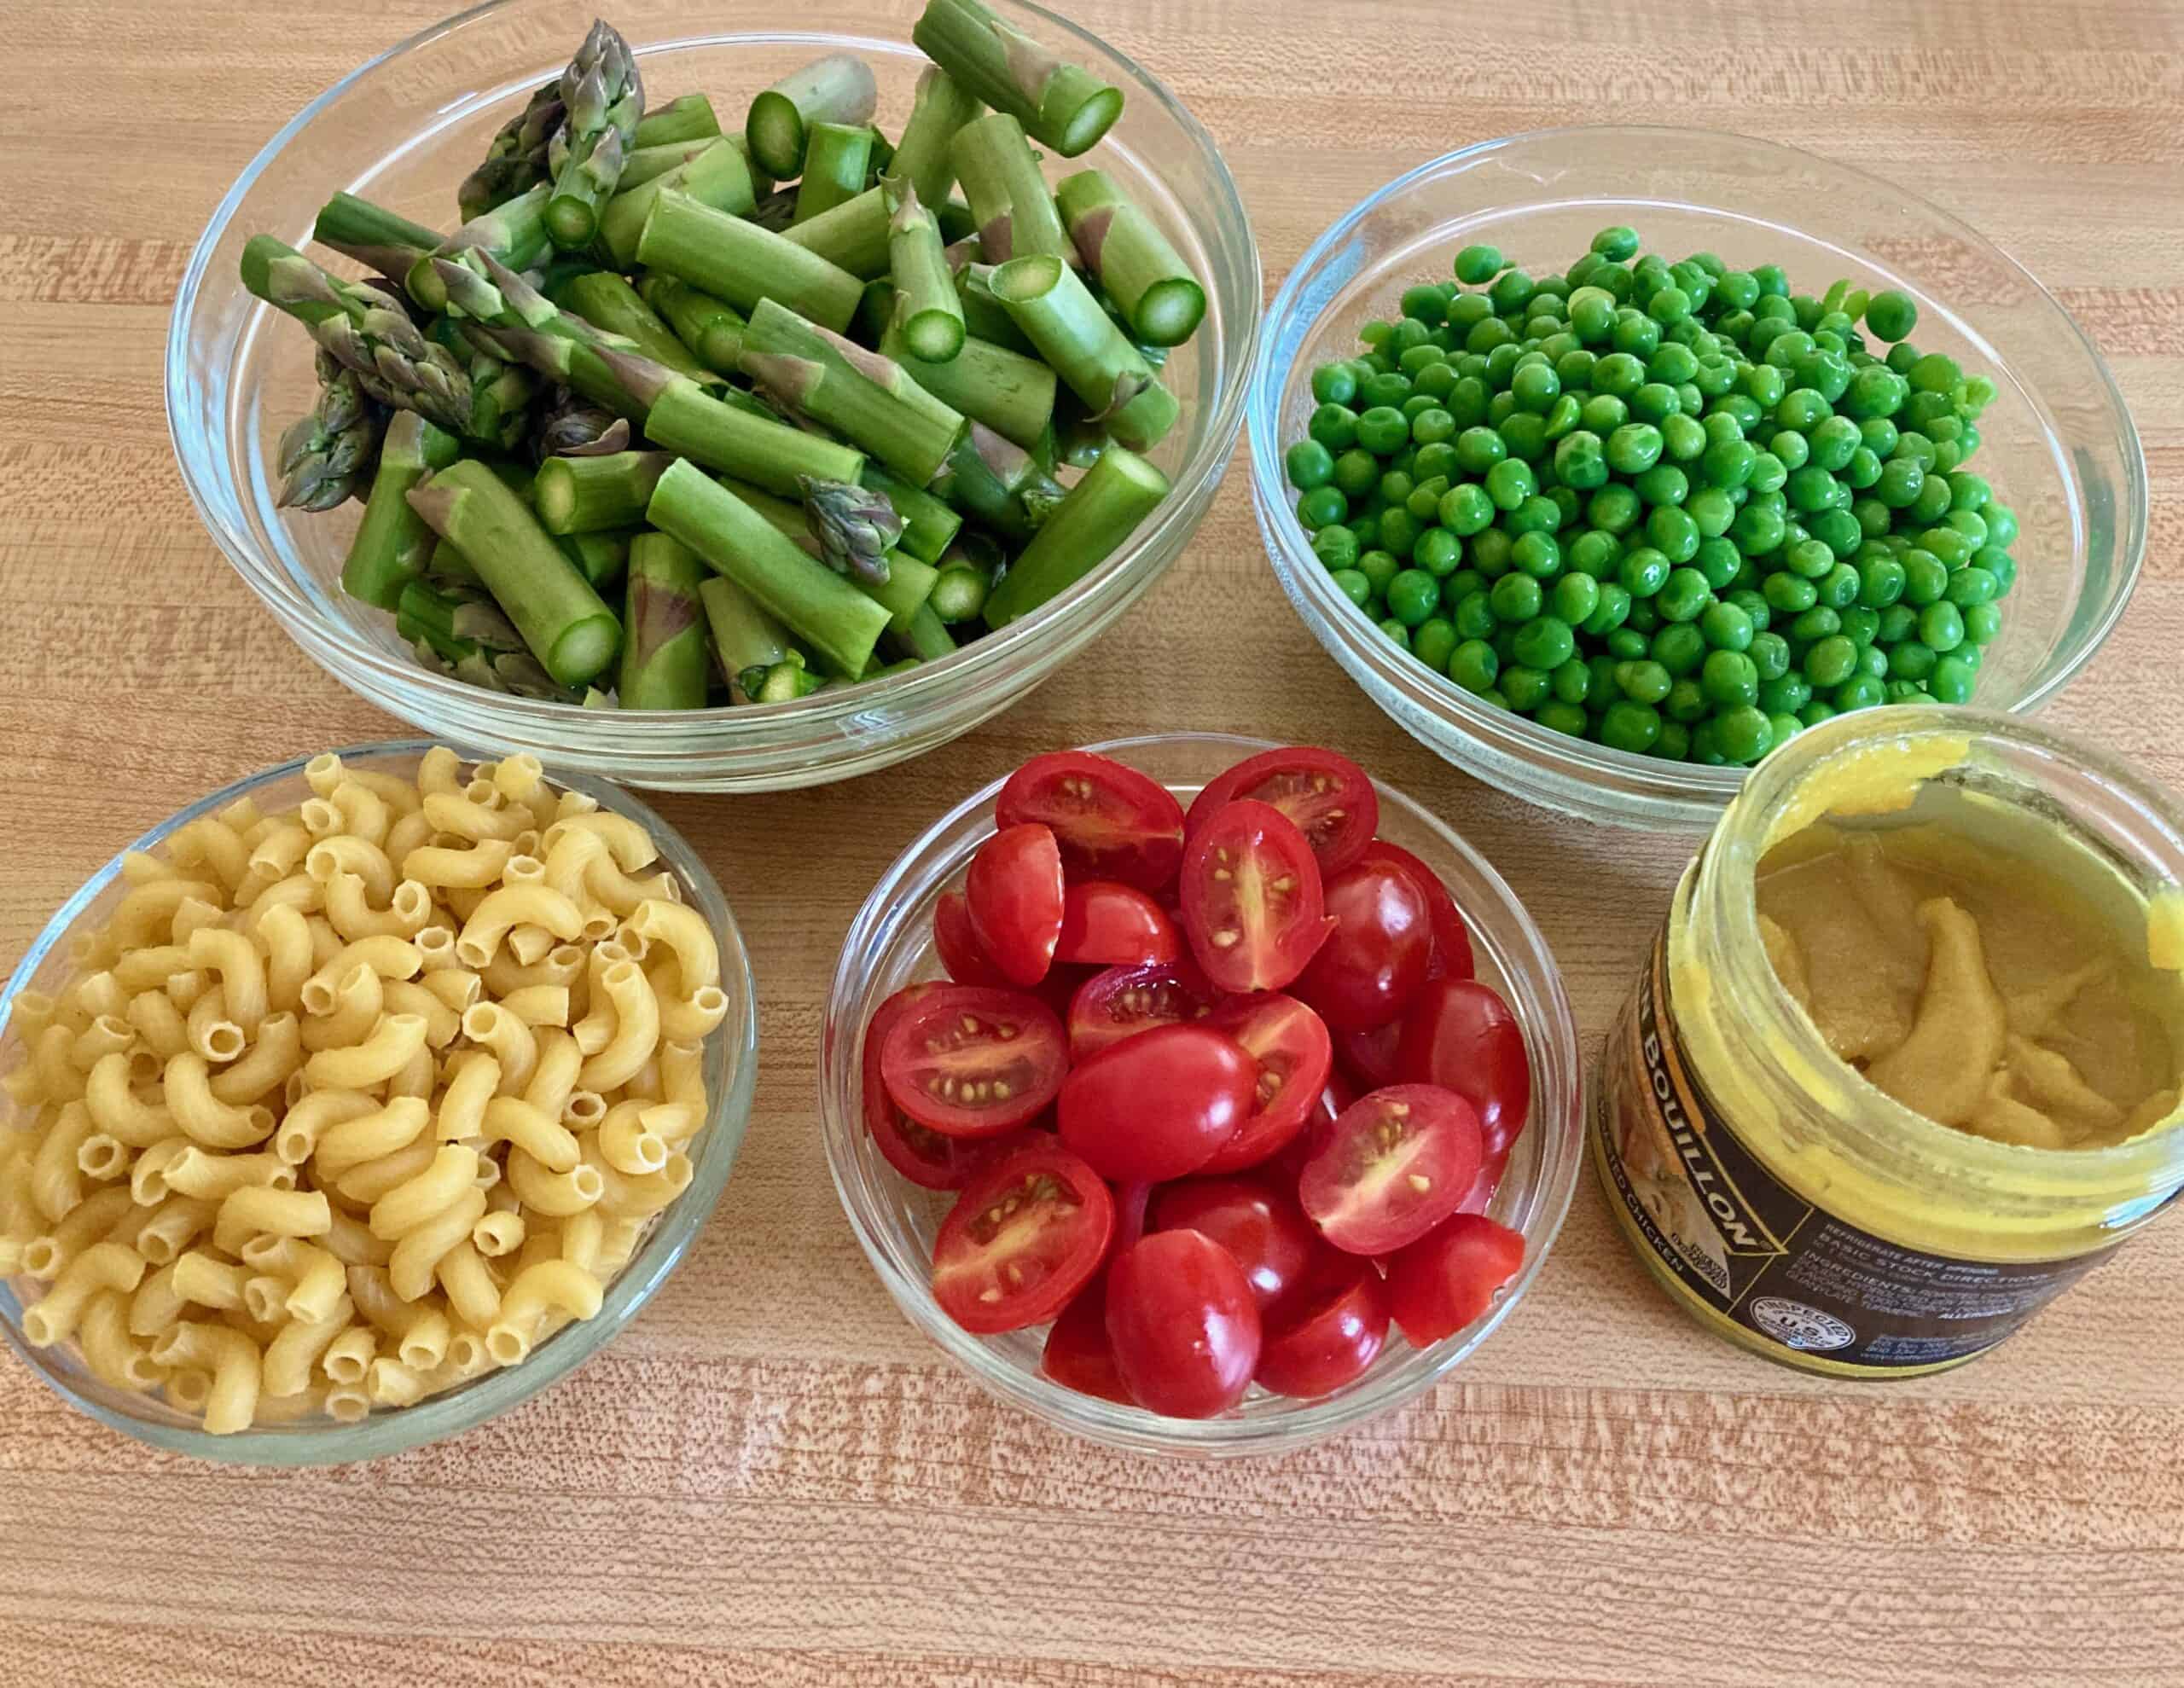 Bowls of chopped asparagus, peas, elbow macaroni and sliced cherry tomatoes on a counter along with a jar of Better Than Bouillon.